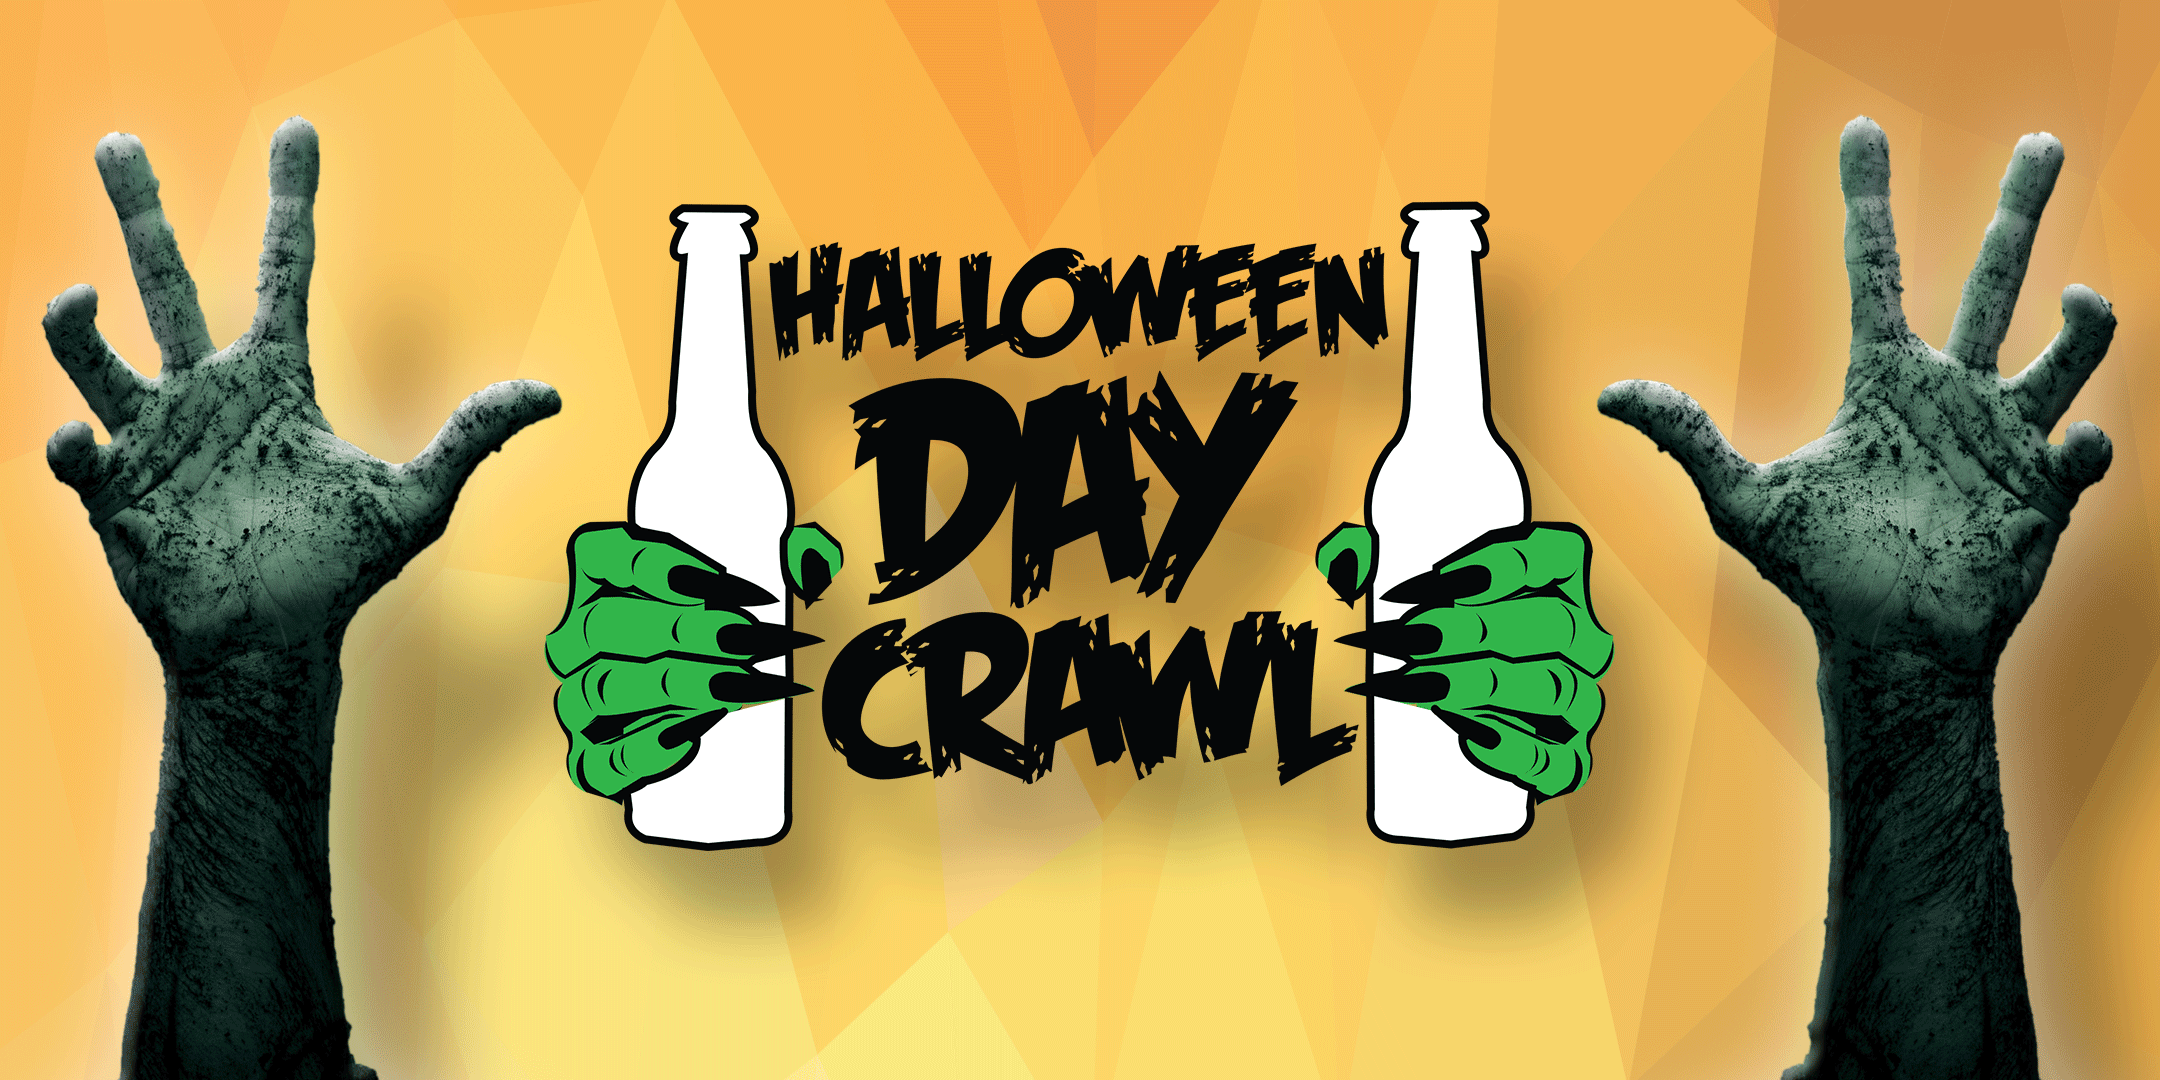 Halloween DAY Crawl - Sat. Oct. 30th in River North - Chicago